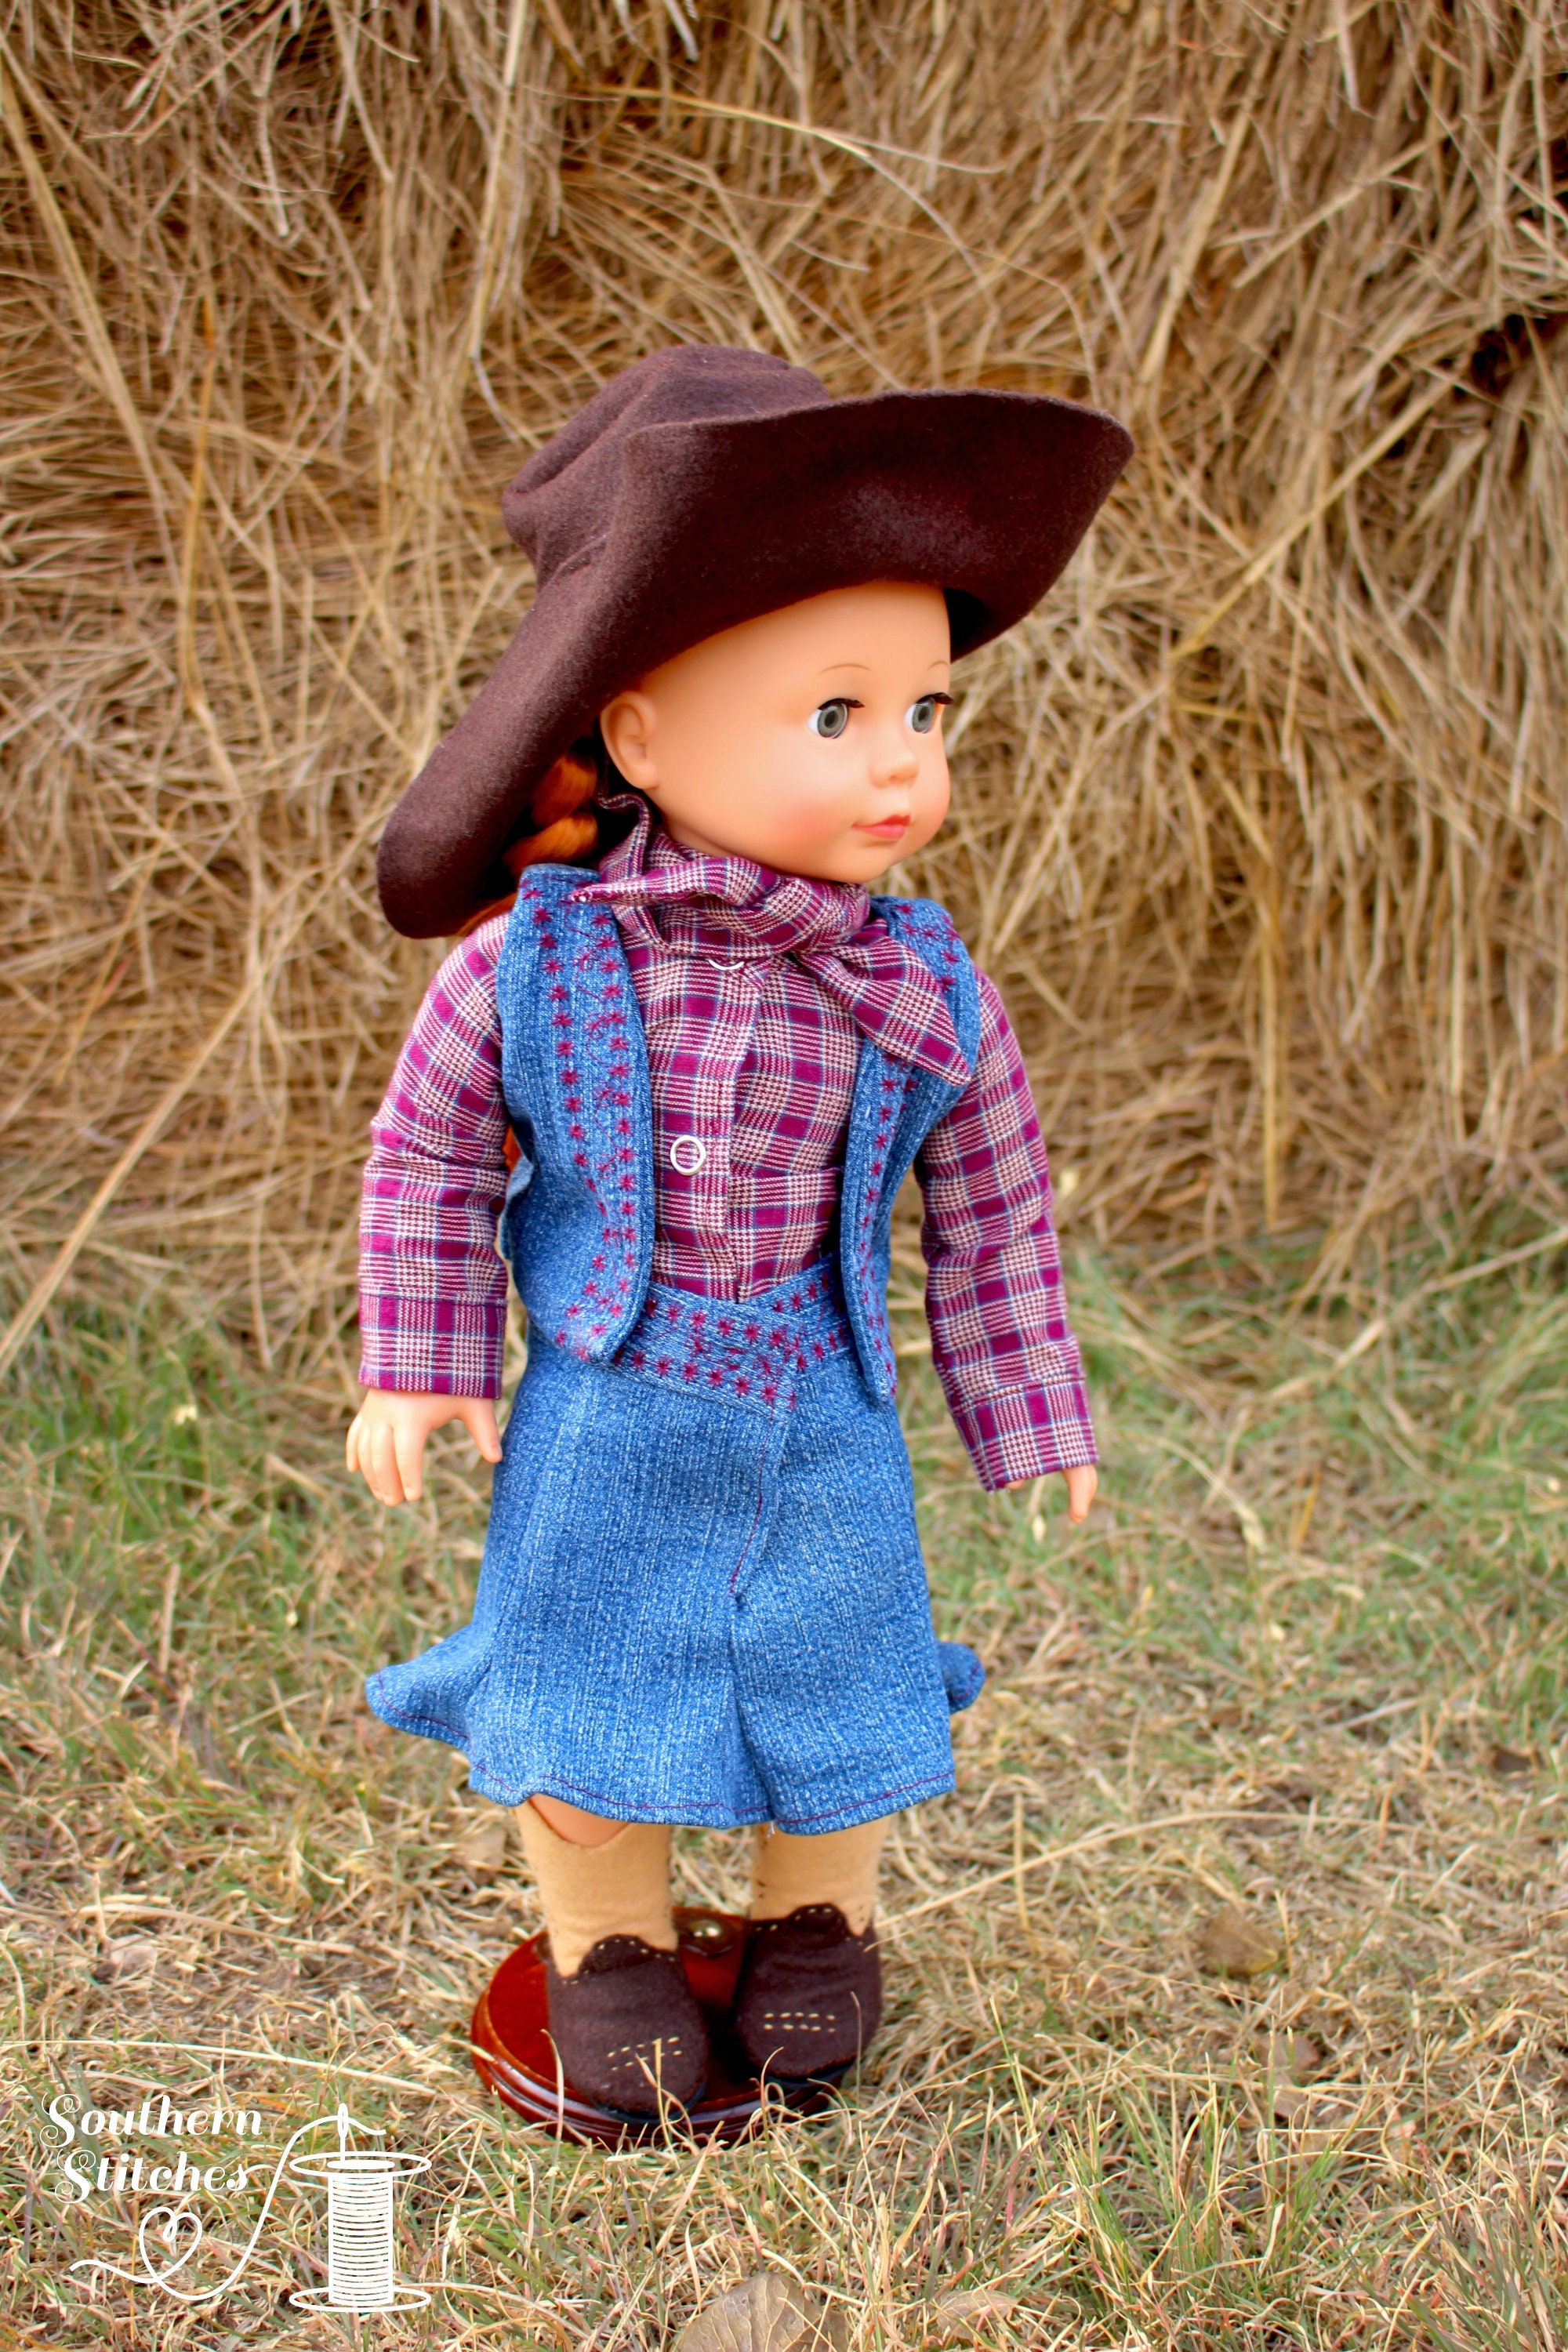 Black Western Cowboy Hat Accessories fits 18 inch American Girl Doll  Clothes